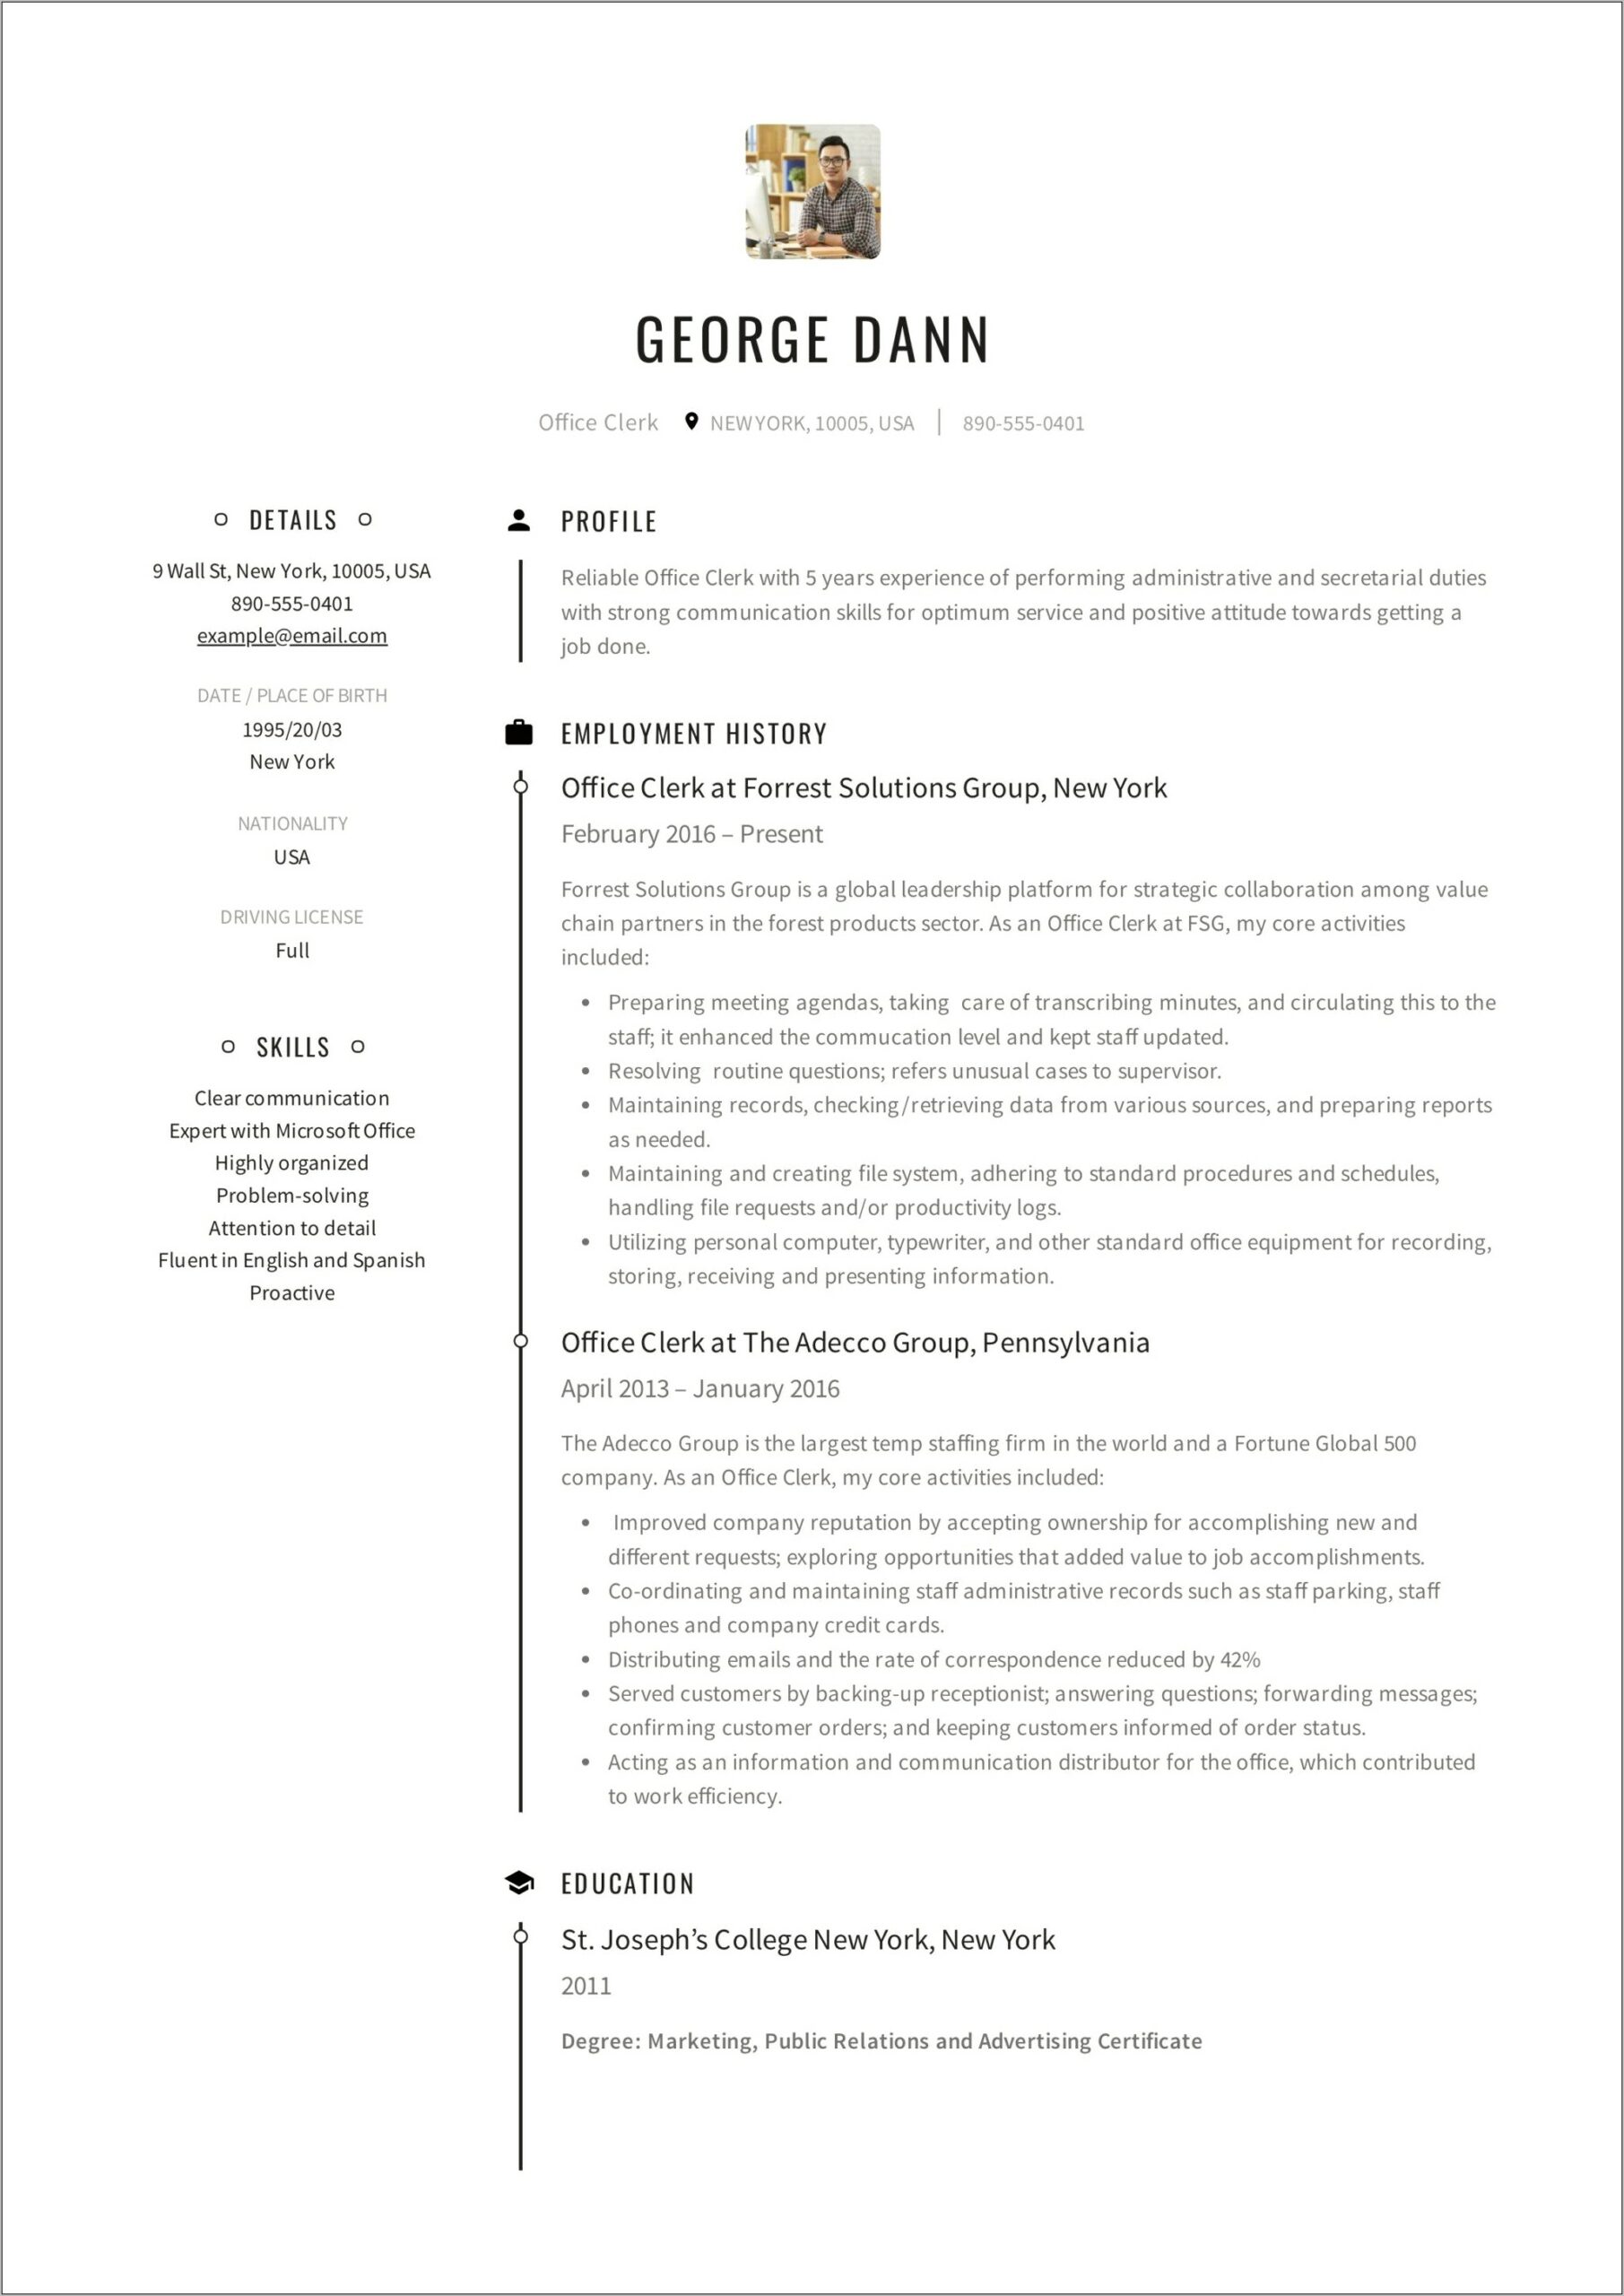 Resume Examples For Inventory Clerk